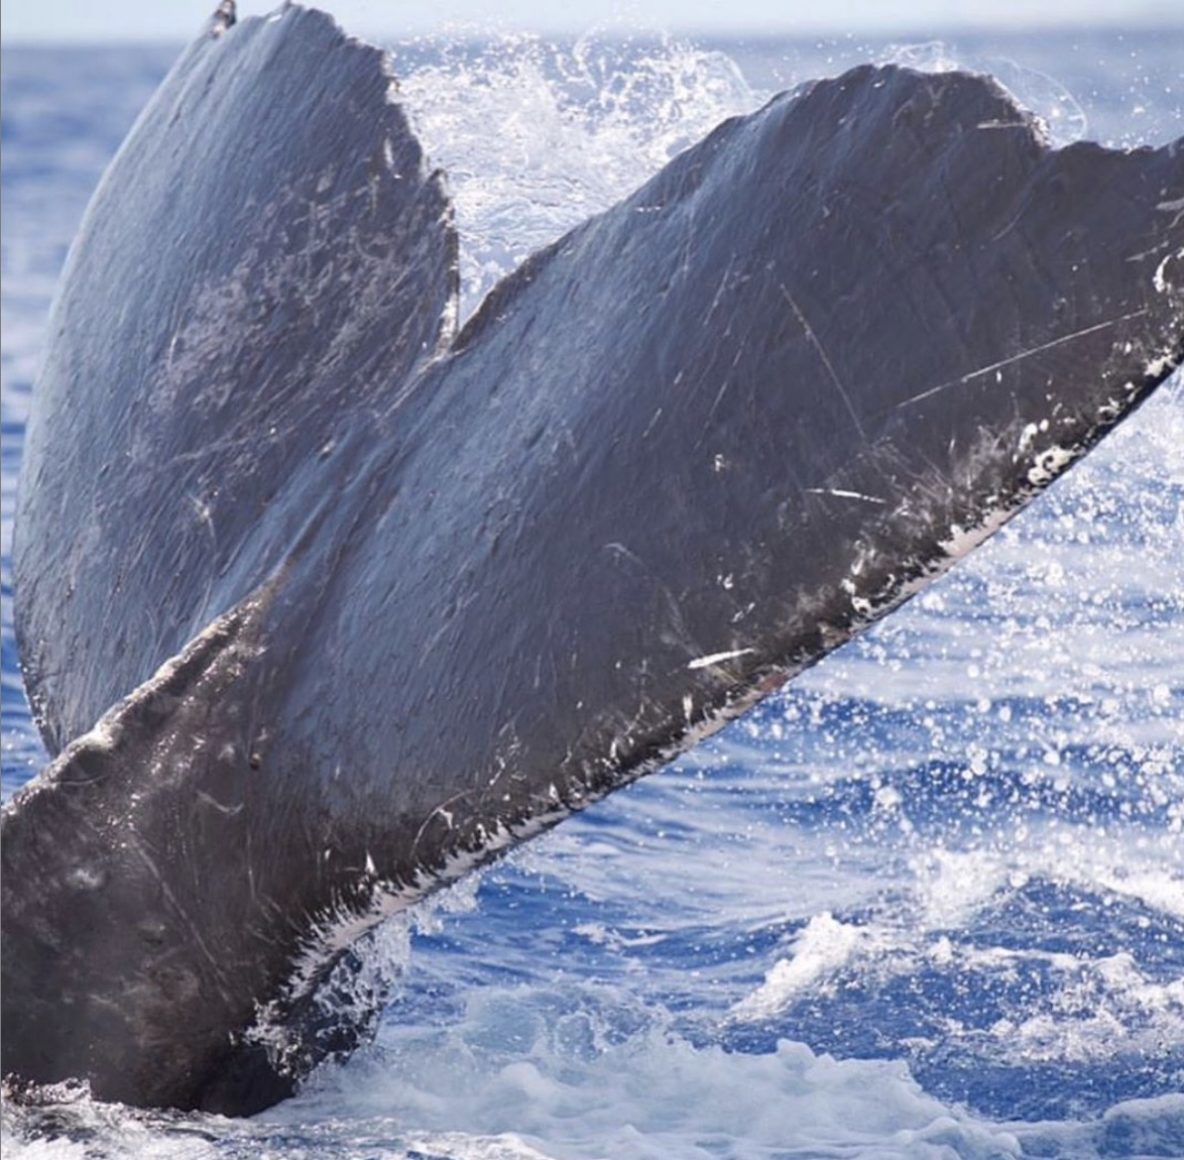 What's the best weather for whale watching in Maui?